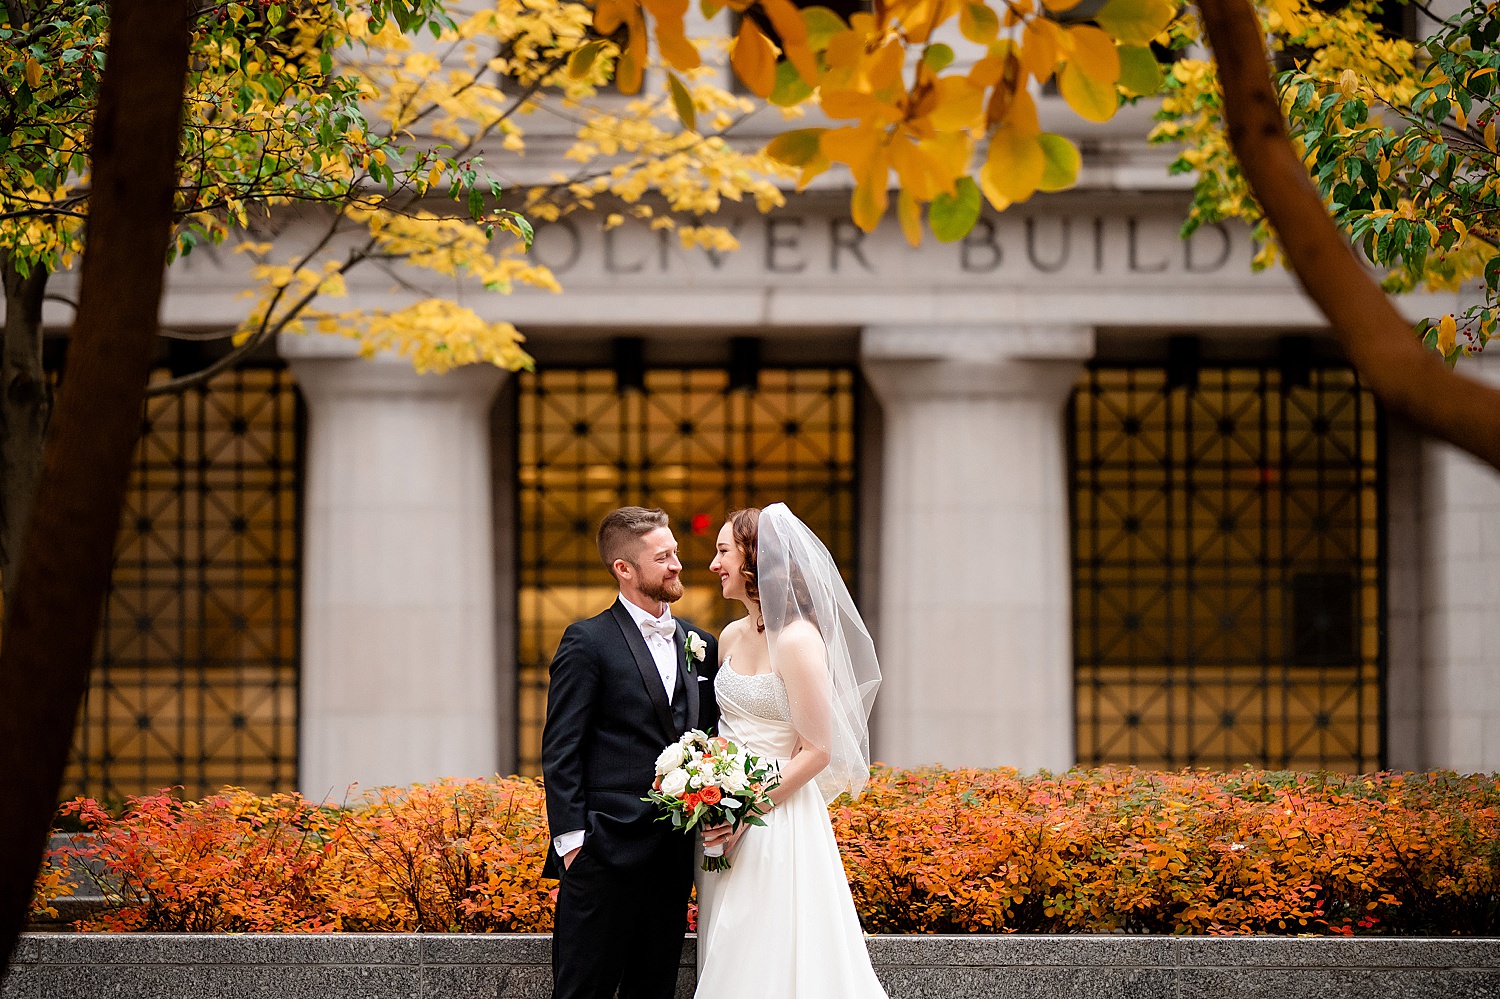 wedding picture at mellon green in autumn • Love at First Sight: Wedding at the Omni William Penn and St Rosalia Church